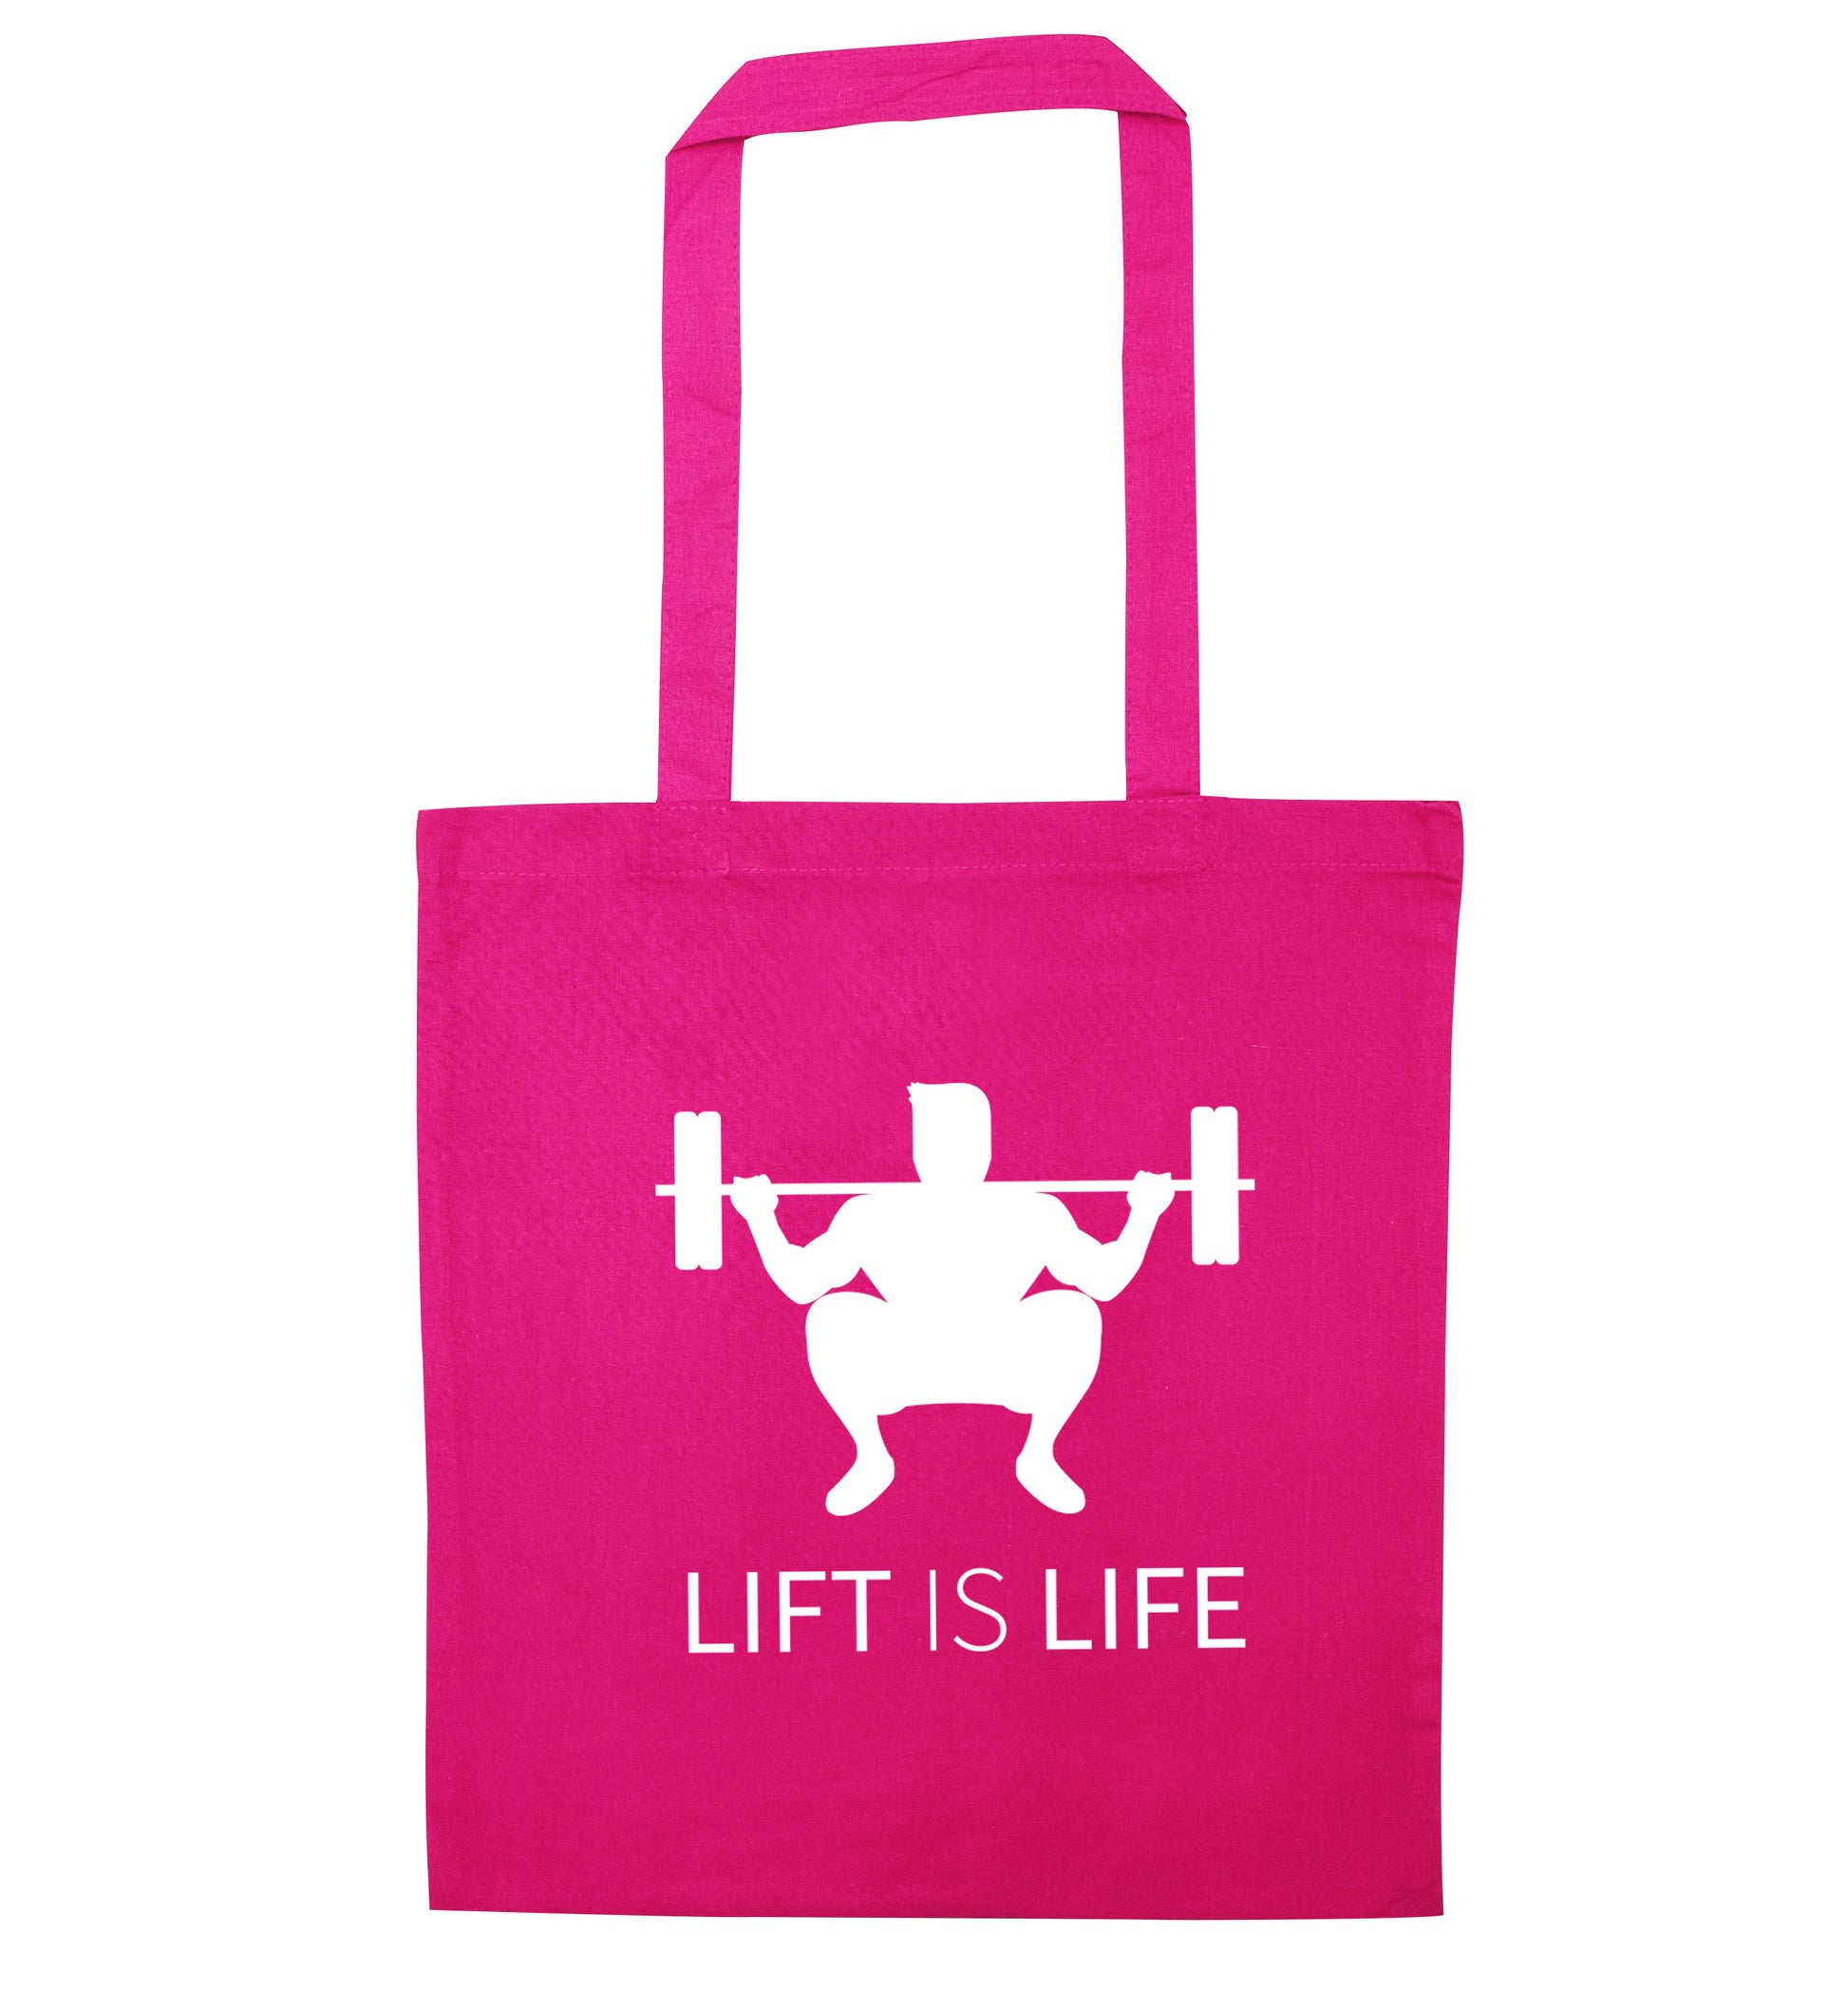 Lift is life pink tote bag